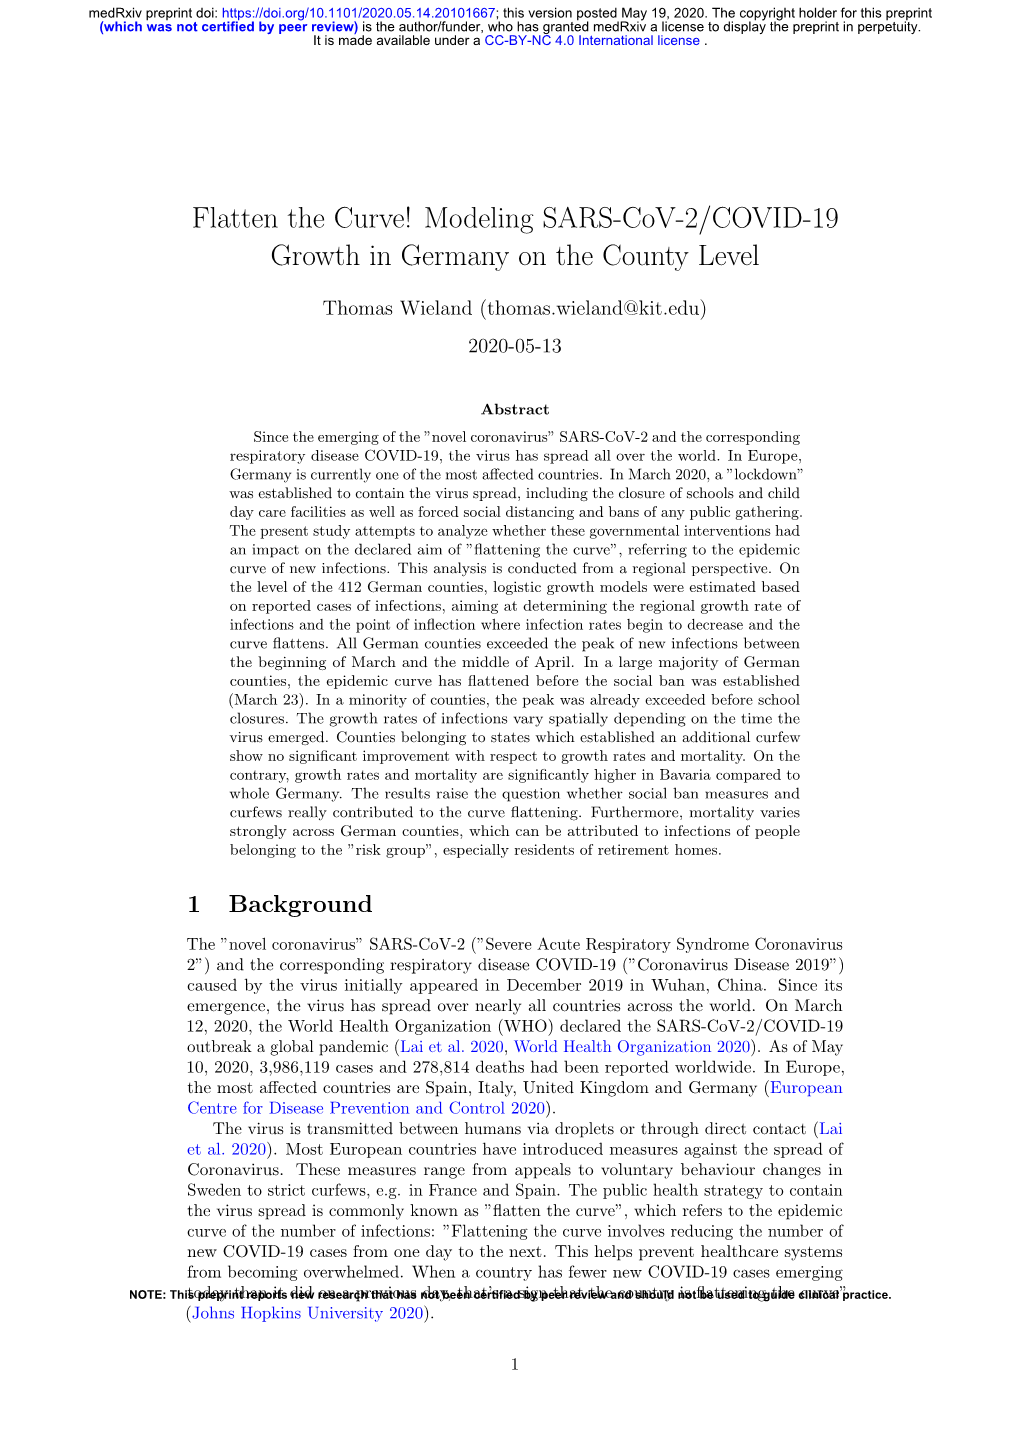 Flatten the Curve! Modeling SARS-Cov-2/COVID-19 Growth in Germany on the County Level